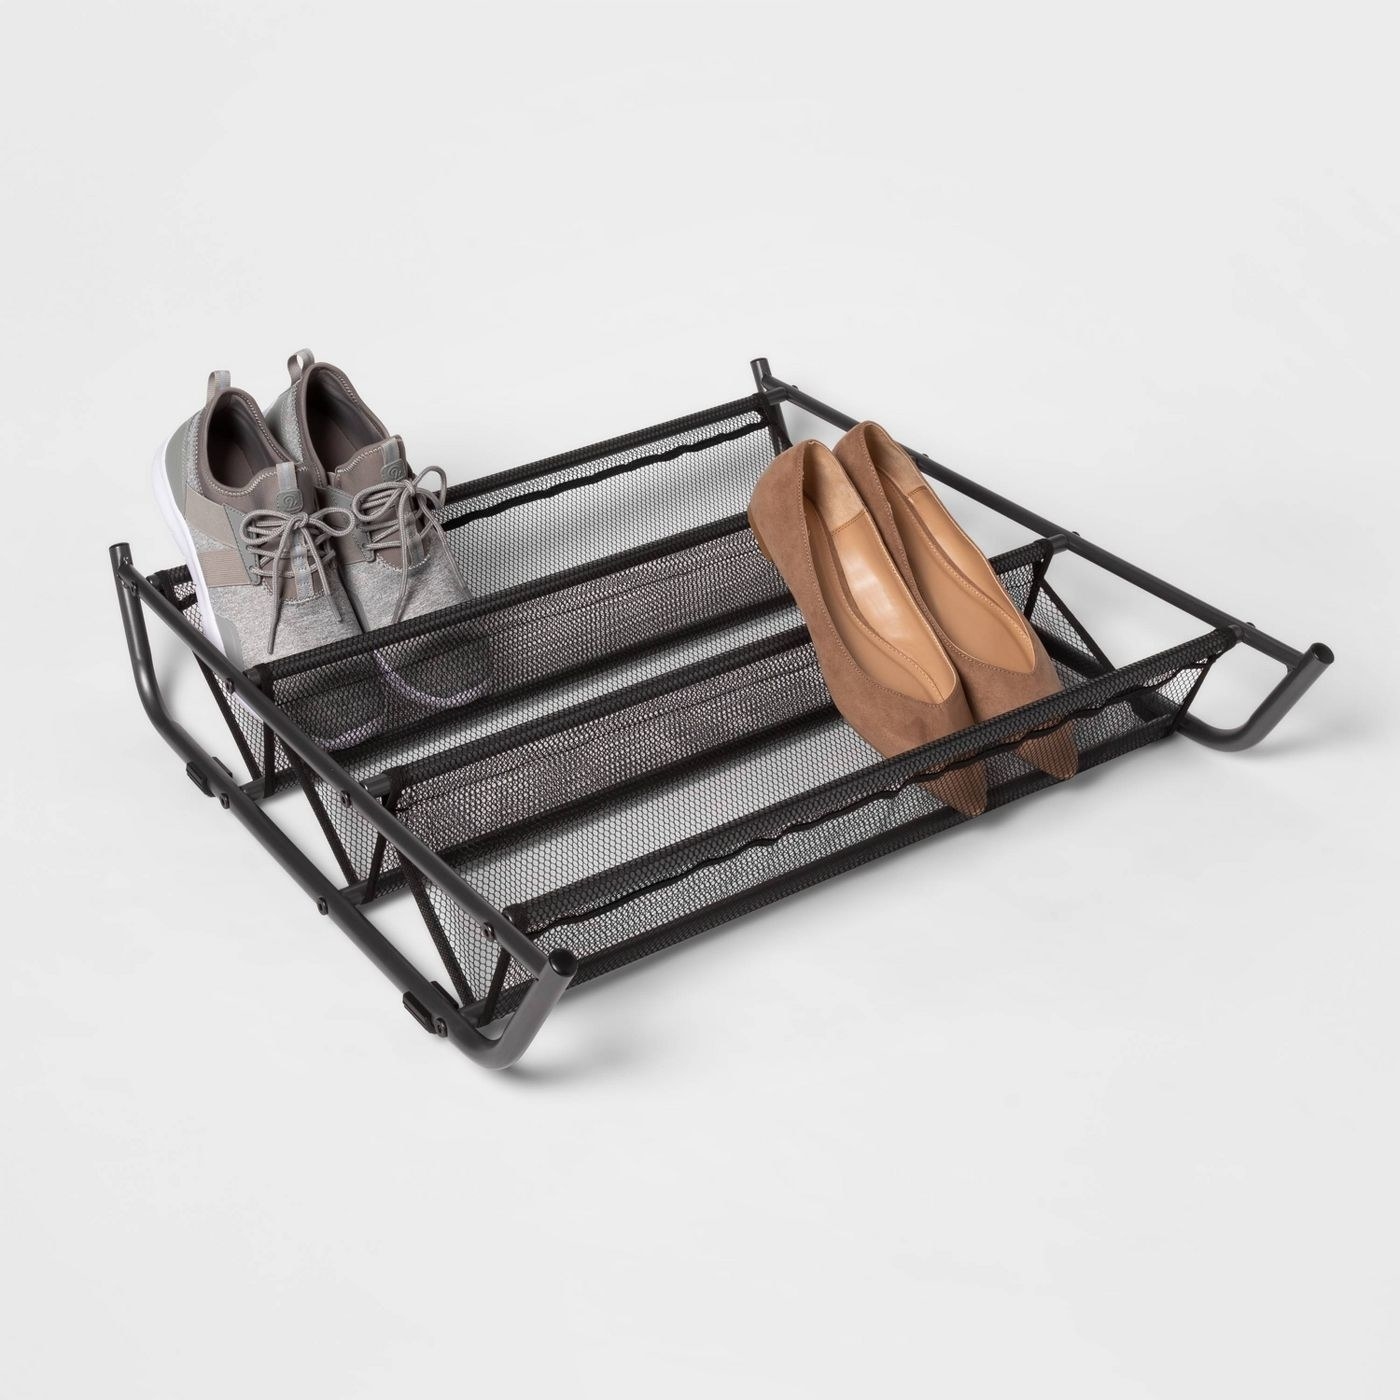 The metal shoe organizer with three slots